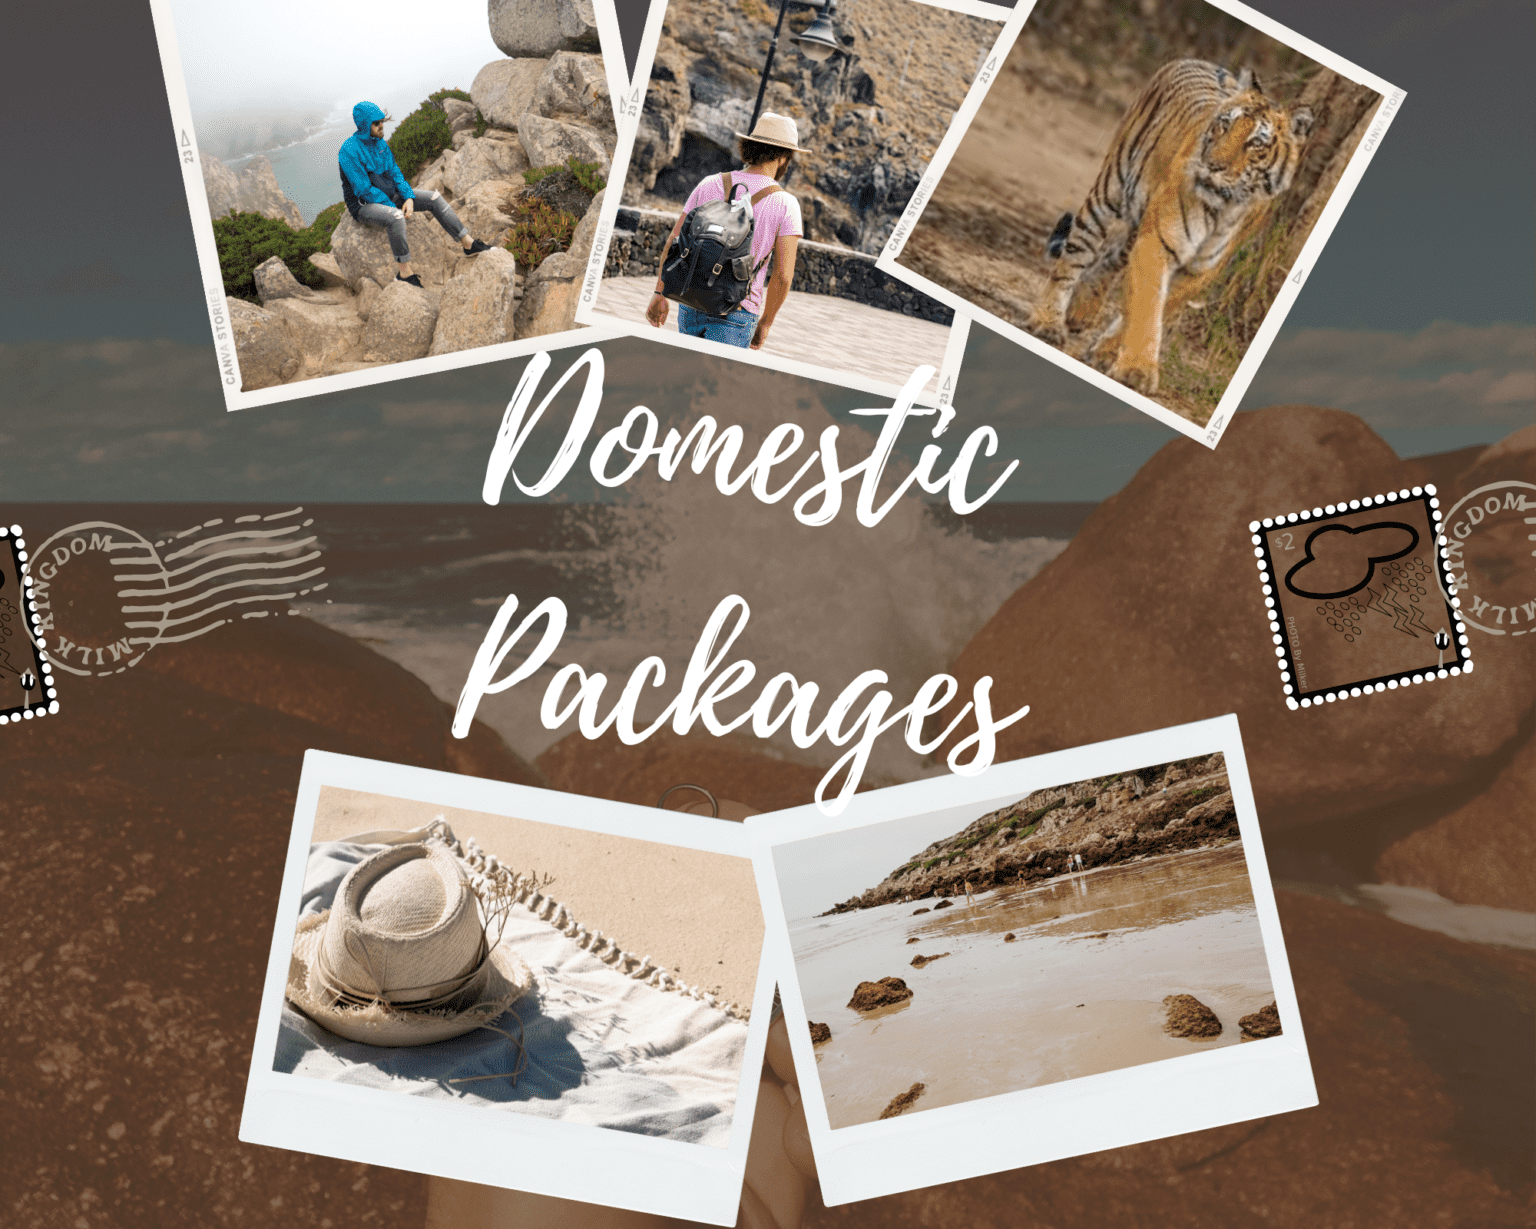 Domestic Packages